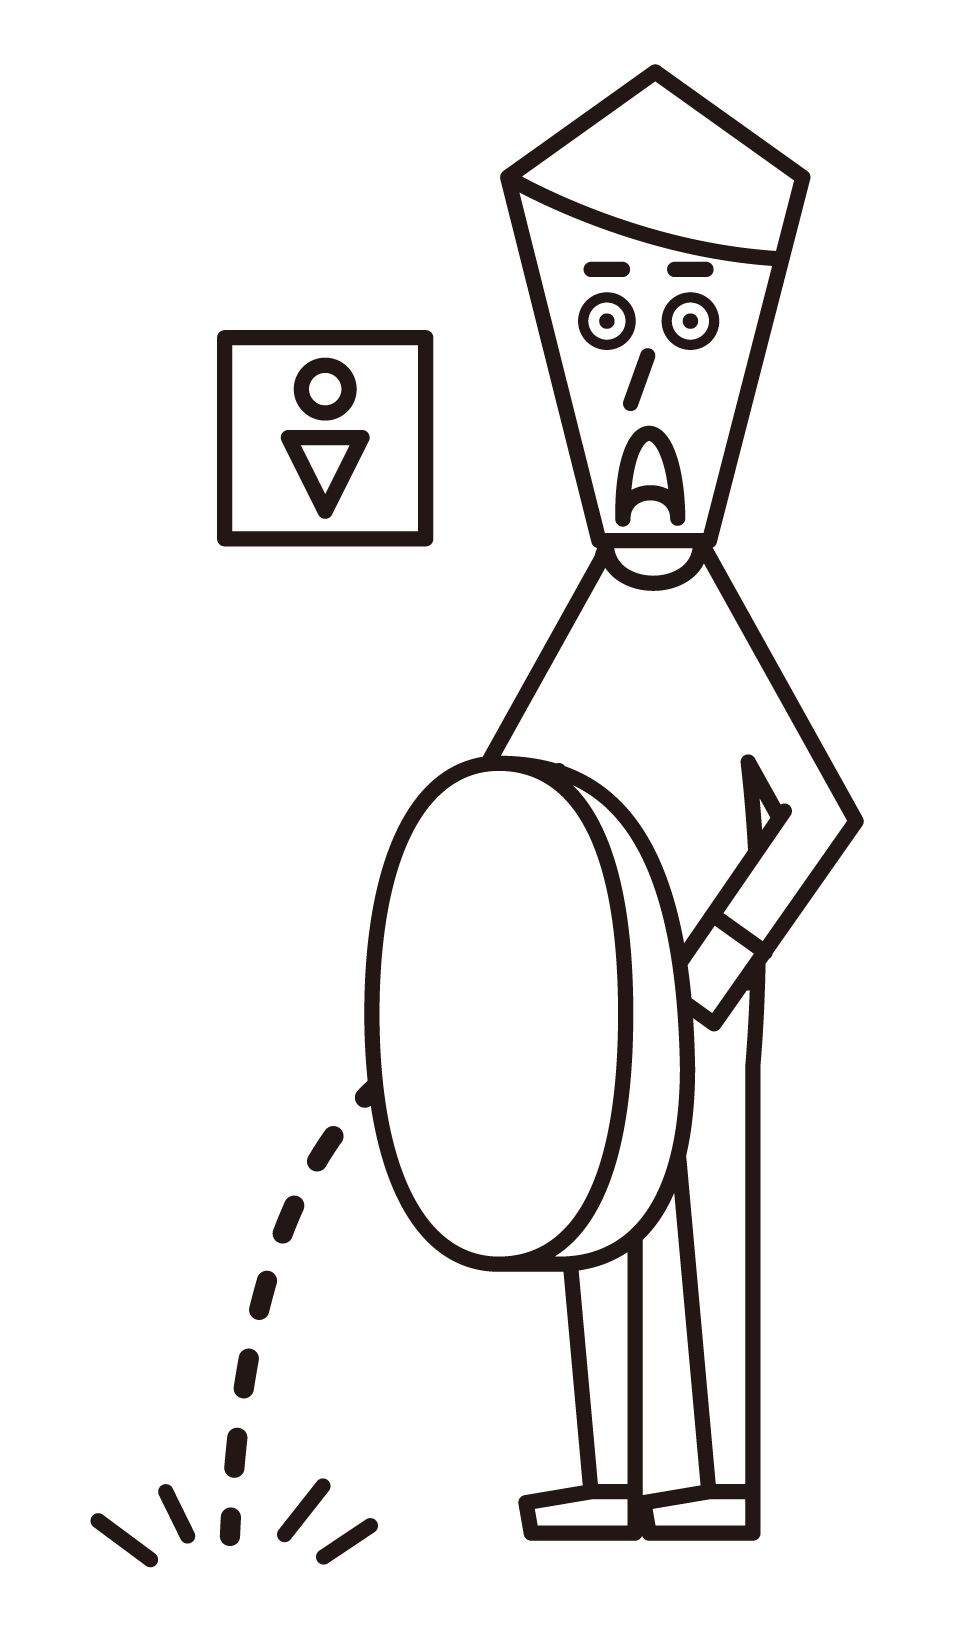 Illustration of a man (male) urinating outside the toilet bowl